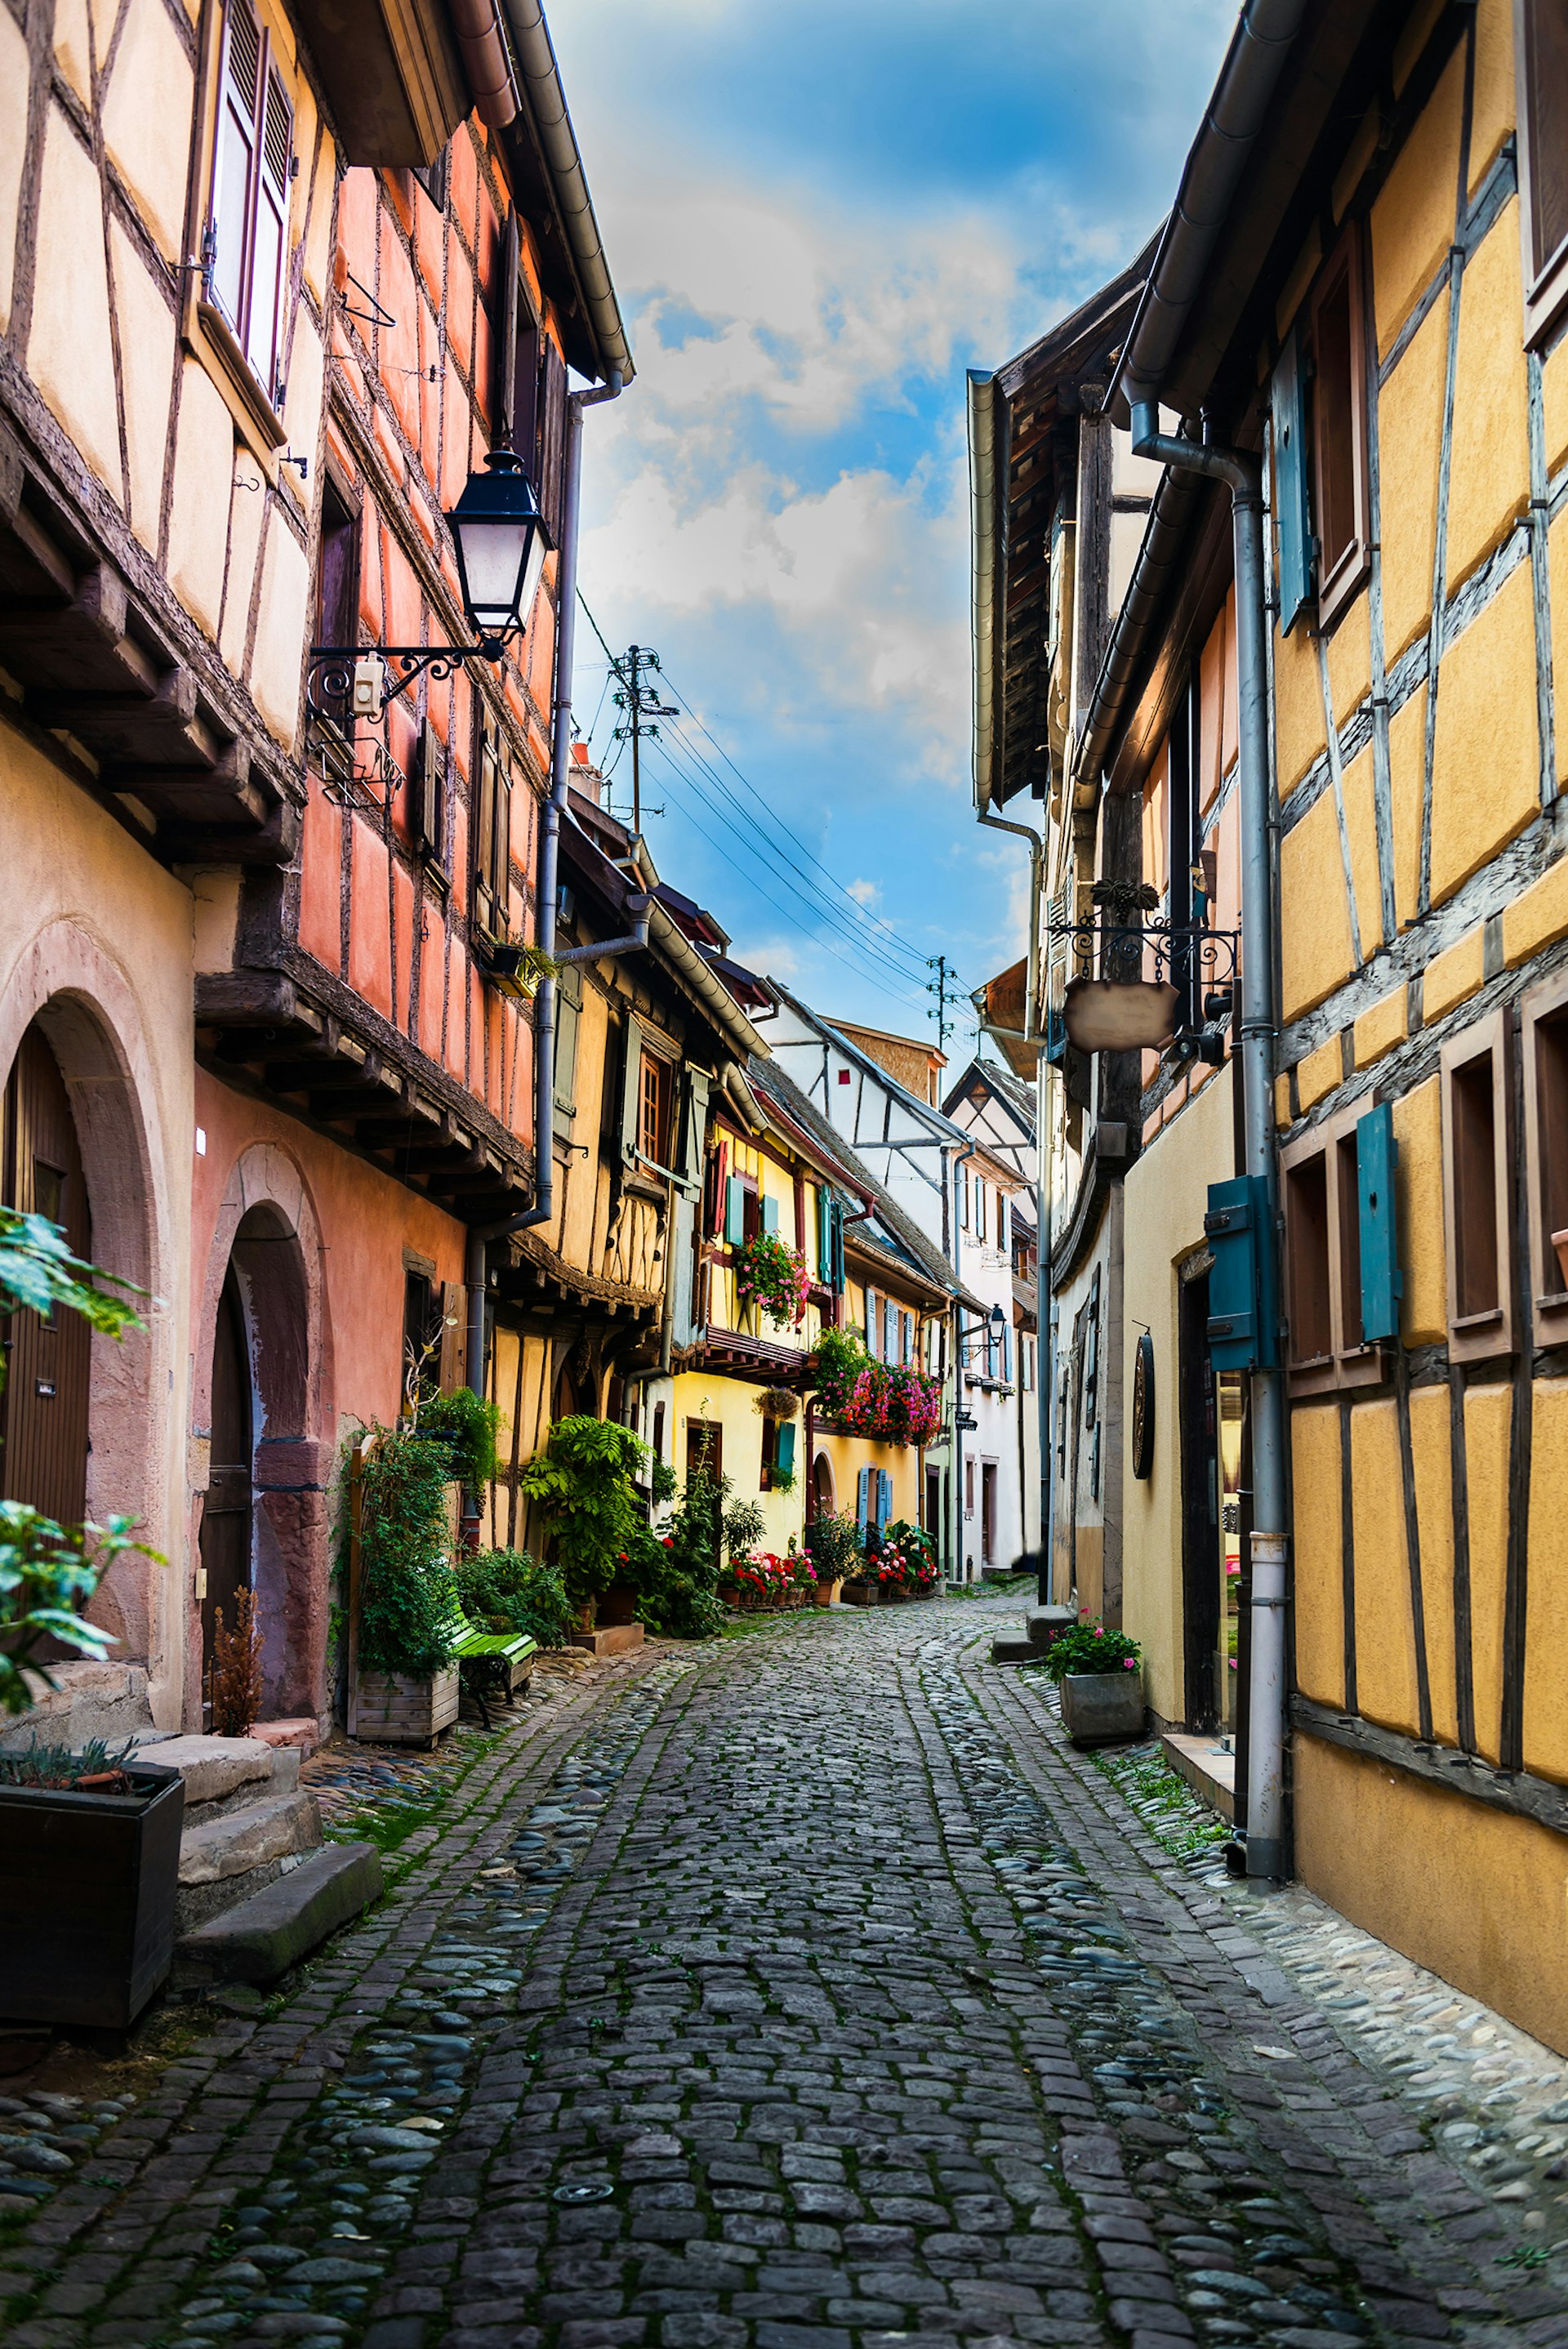 Street of half-timbered houses in Alsace